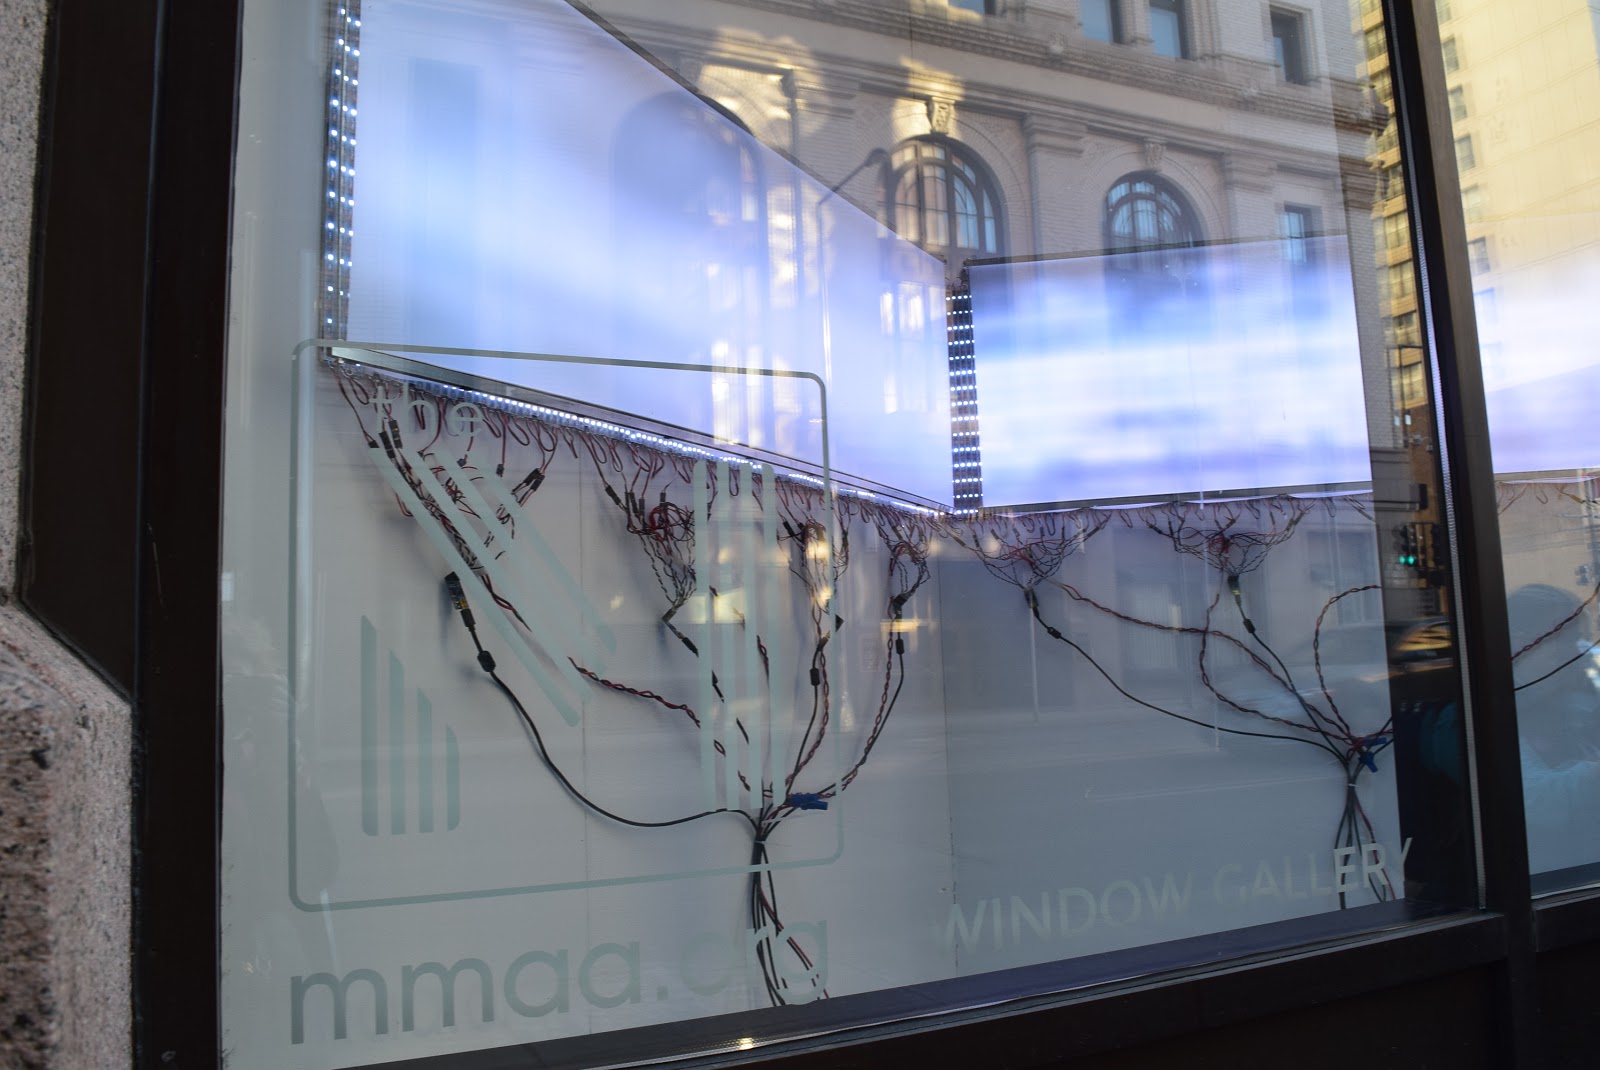 David Bowen’s installation “Wave Line” in The M’s Window Gallery on Robert Street in downtown St. Paul. The artwork was commissioned by the museum.